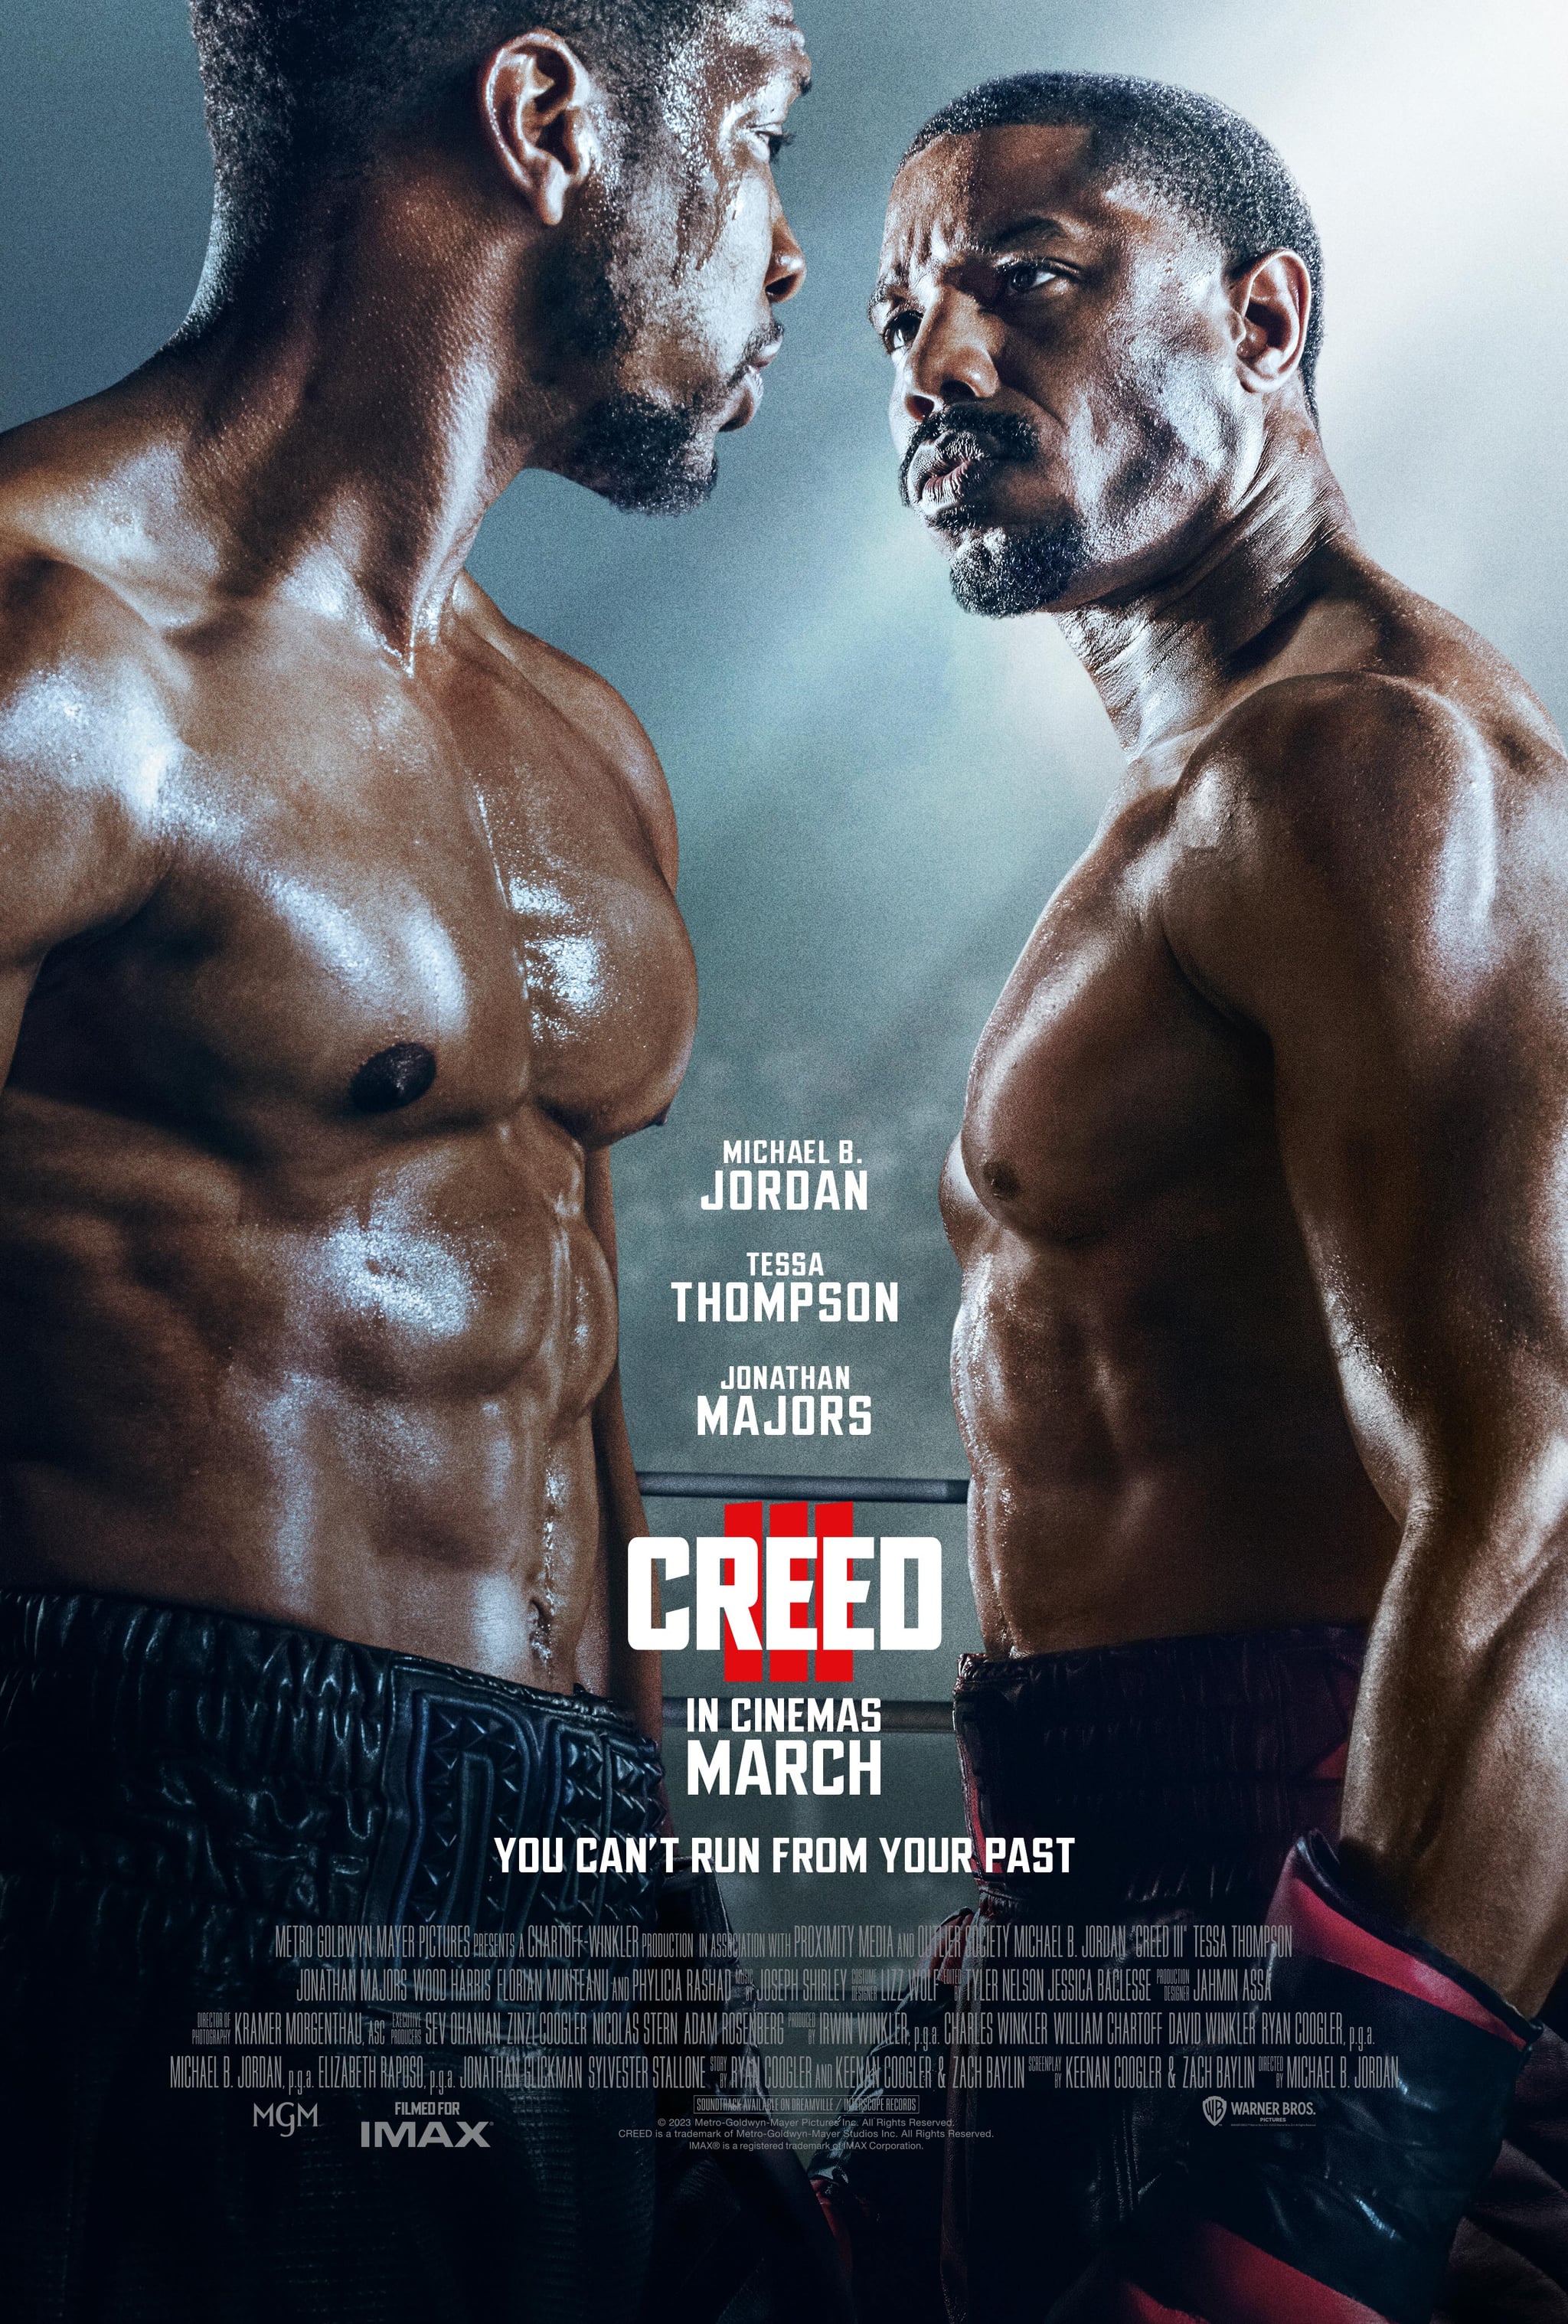 Creed III: Trailer, Cast, Release Date, Plot, Posters